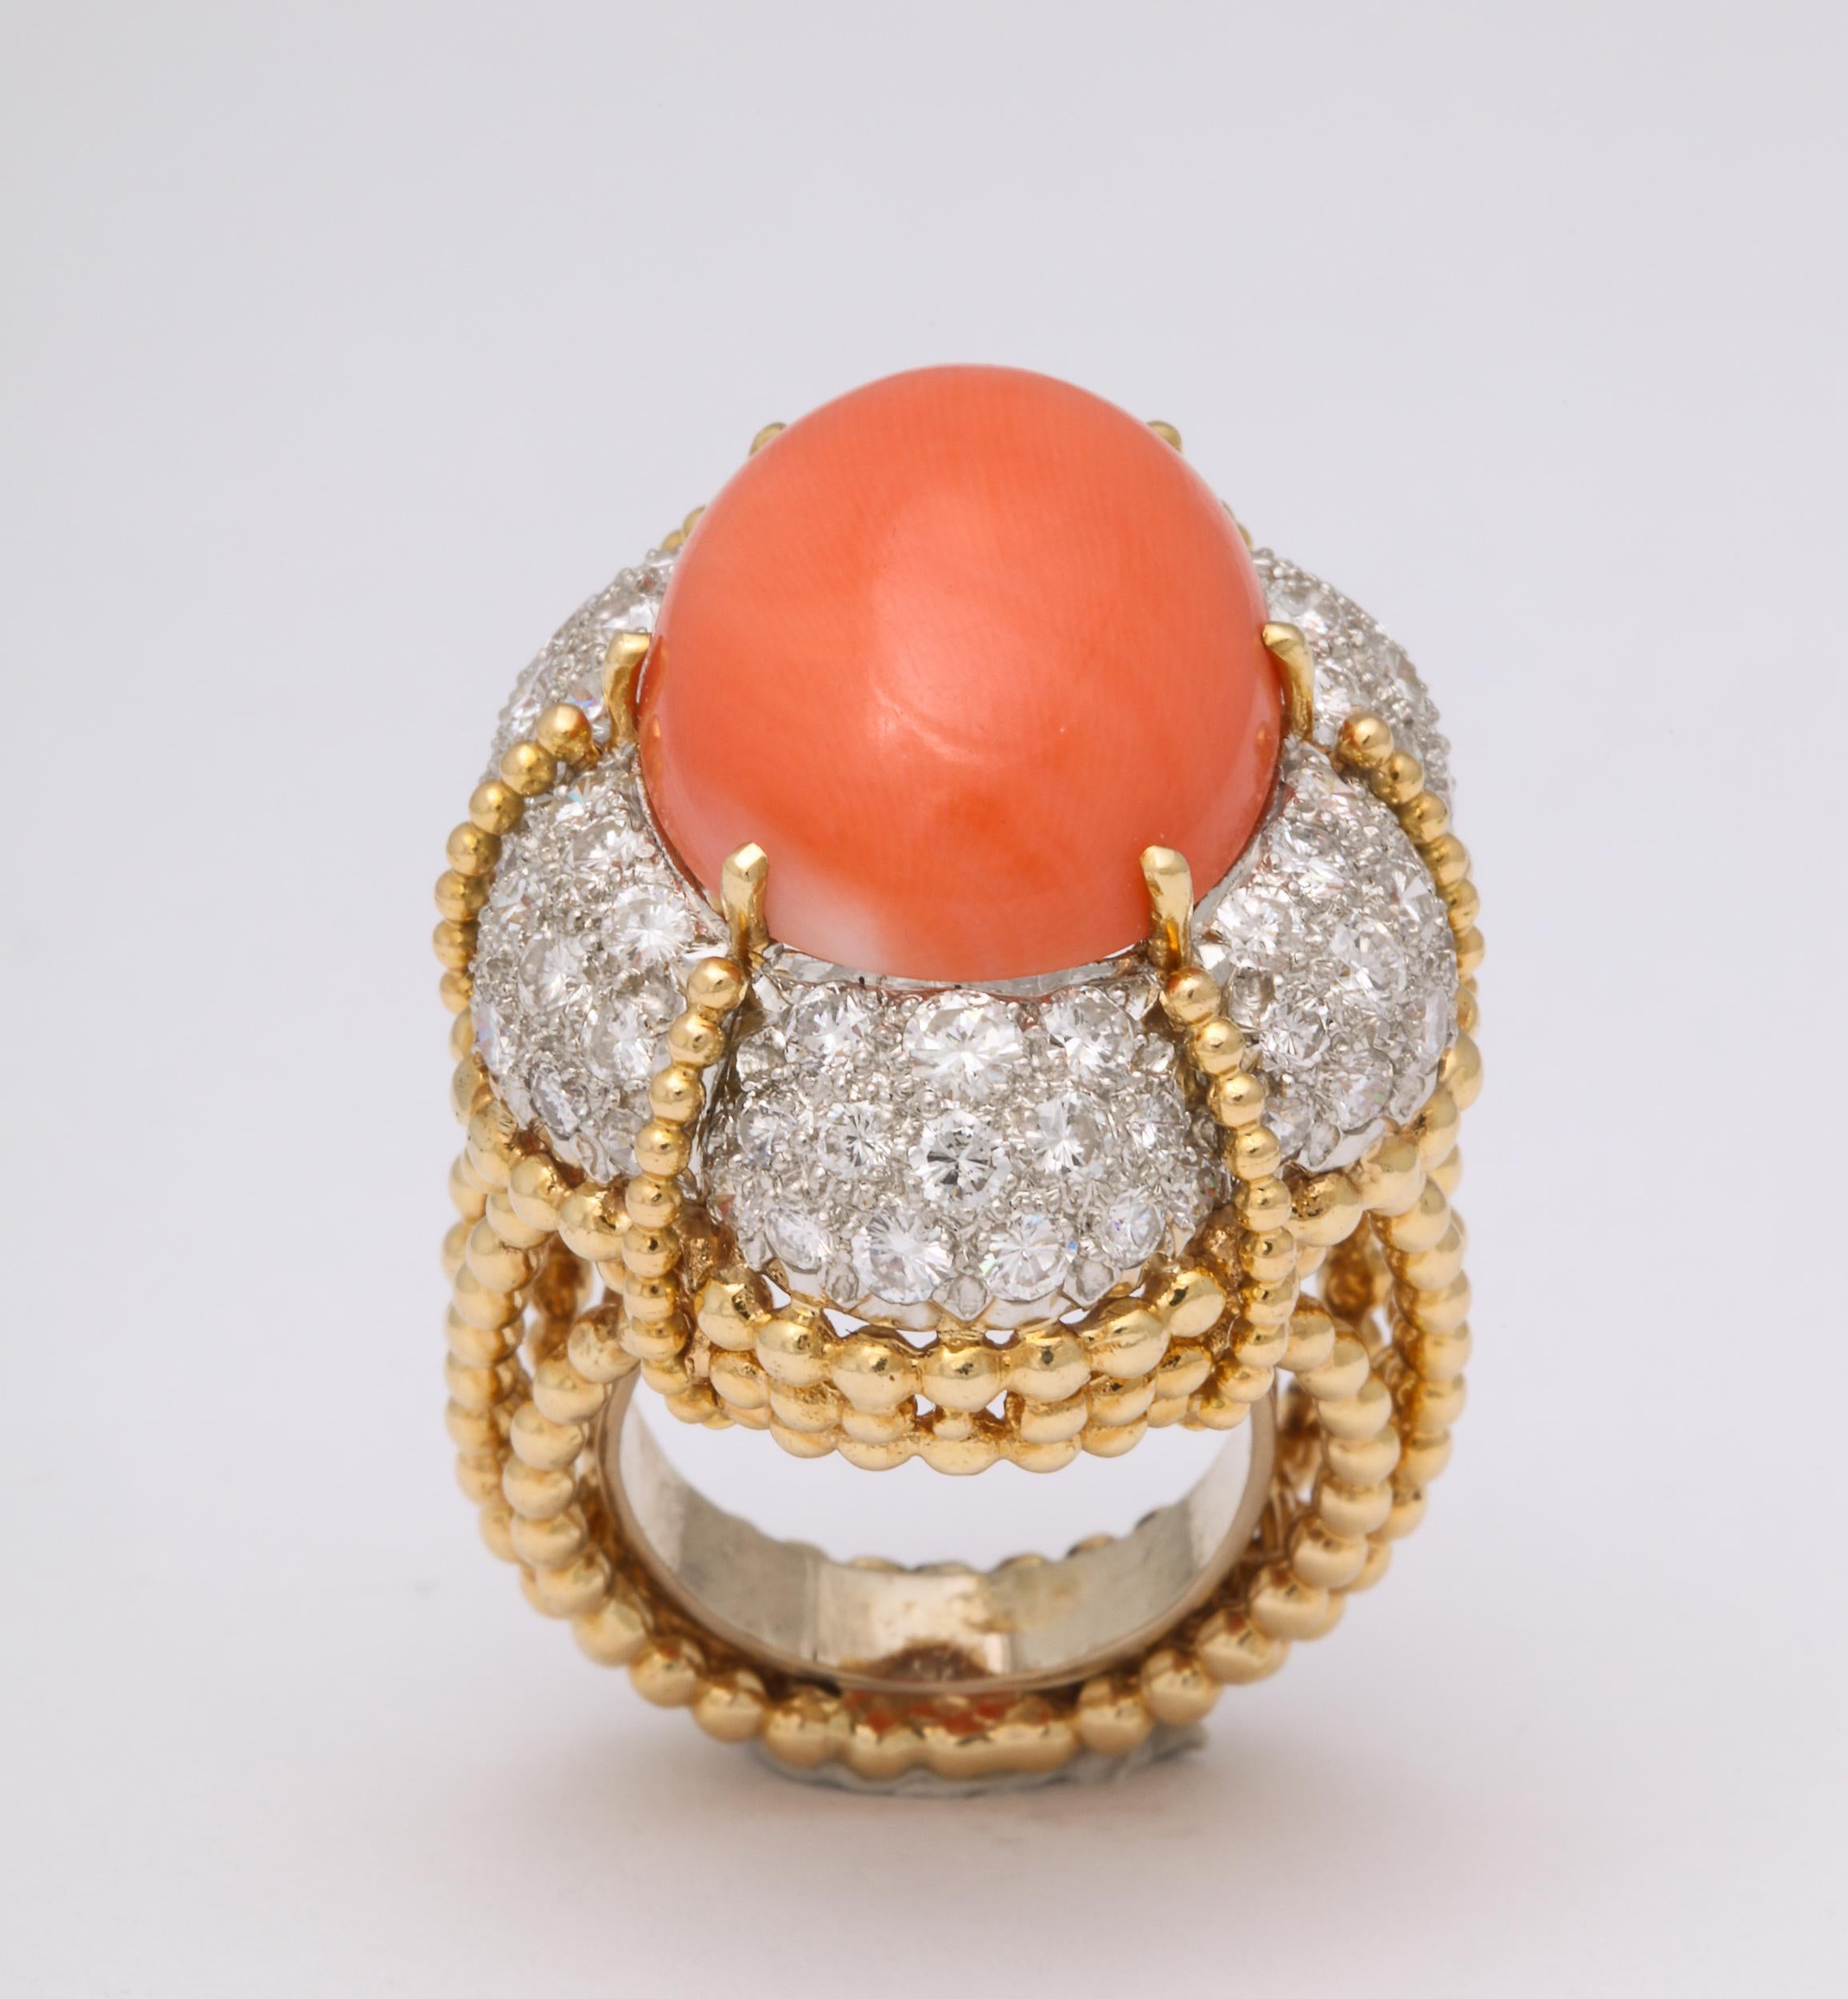 Women's Oversize Orange Coral and Pave Diamond Ring